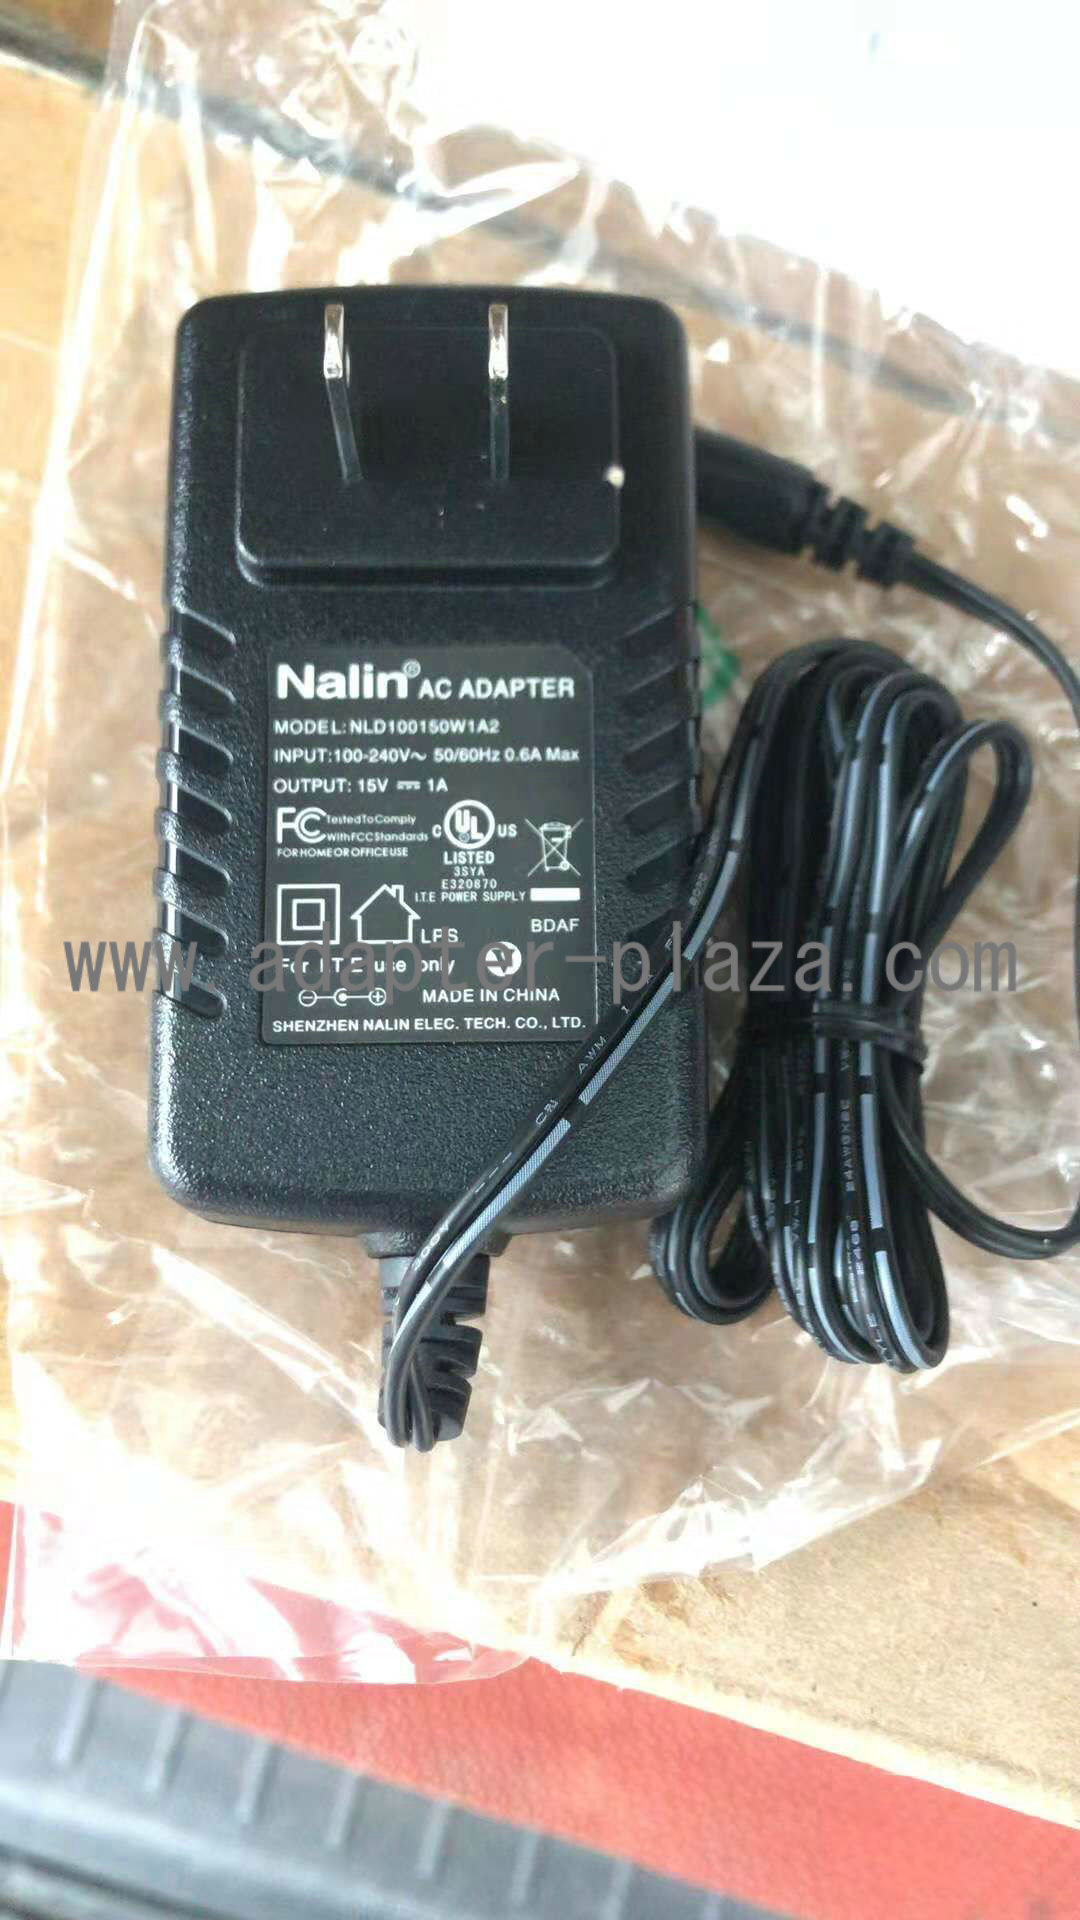 *Brand NEW* Nalin NLD100150W1A2 15V 1A AC DC Adapter POWER SUPPLY